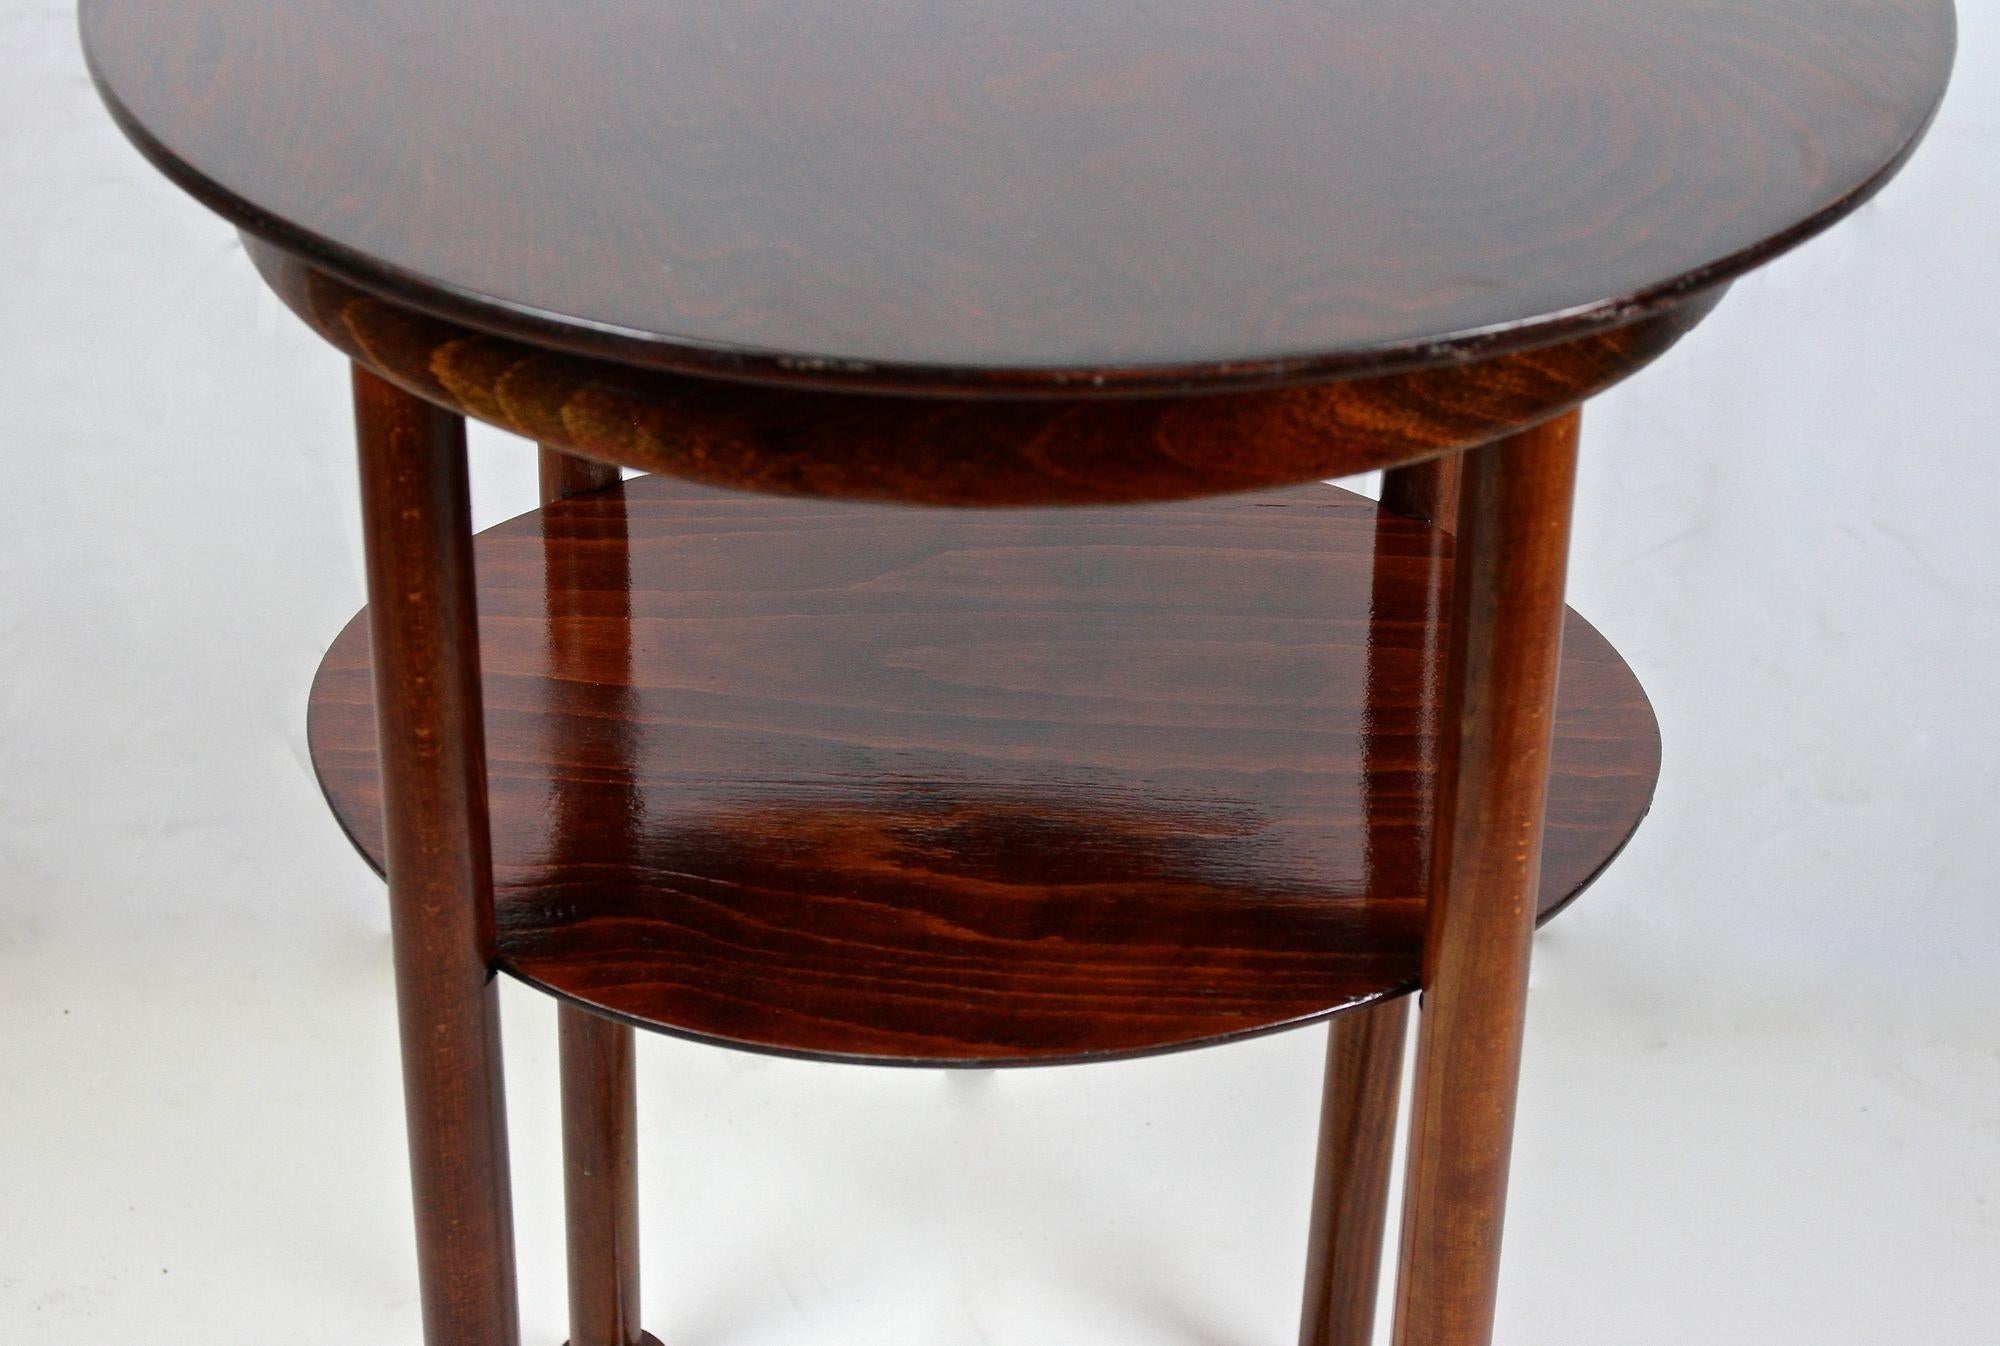 20th Century Art Nouveau Bentwood Side Table by Mundus Vienna, Austria ca. 1902 In Good Condition For Sale In Lichtenberg, AT